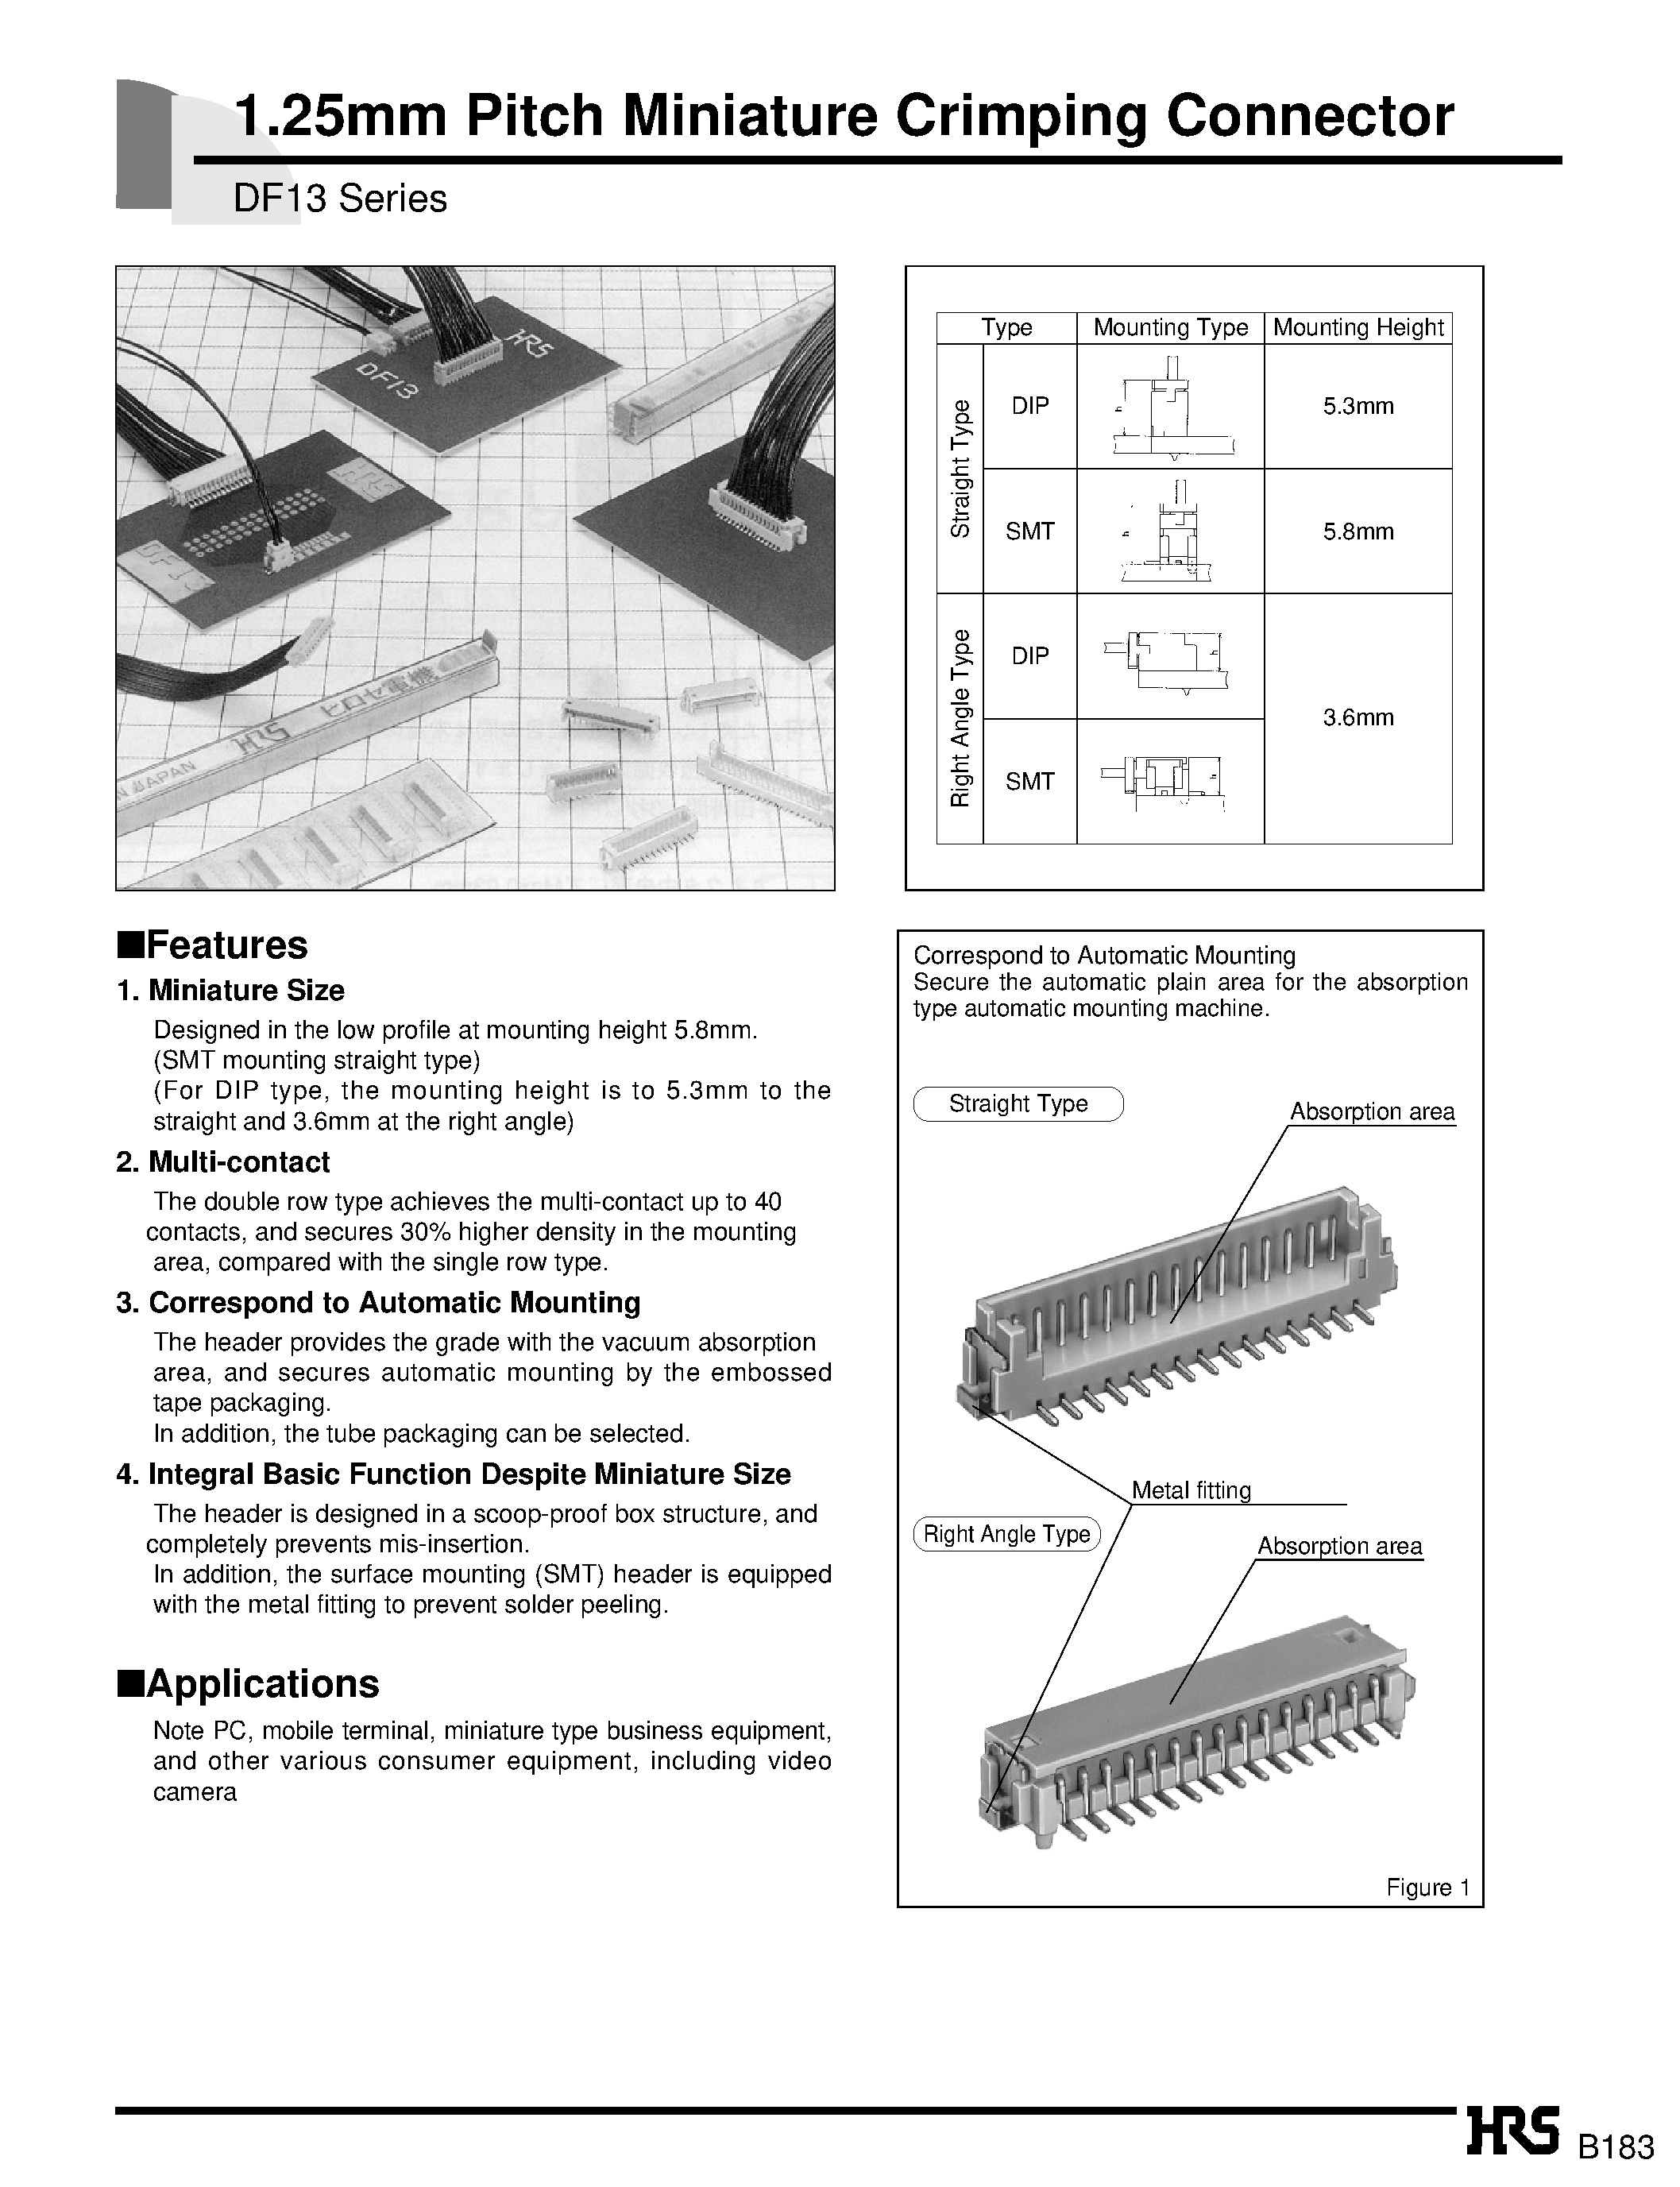 Datasheet DF13-10S-1.25DS - 1.25mm Pitch Miniature Crimping Connector page 1